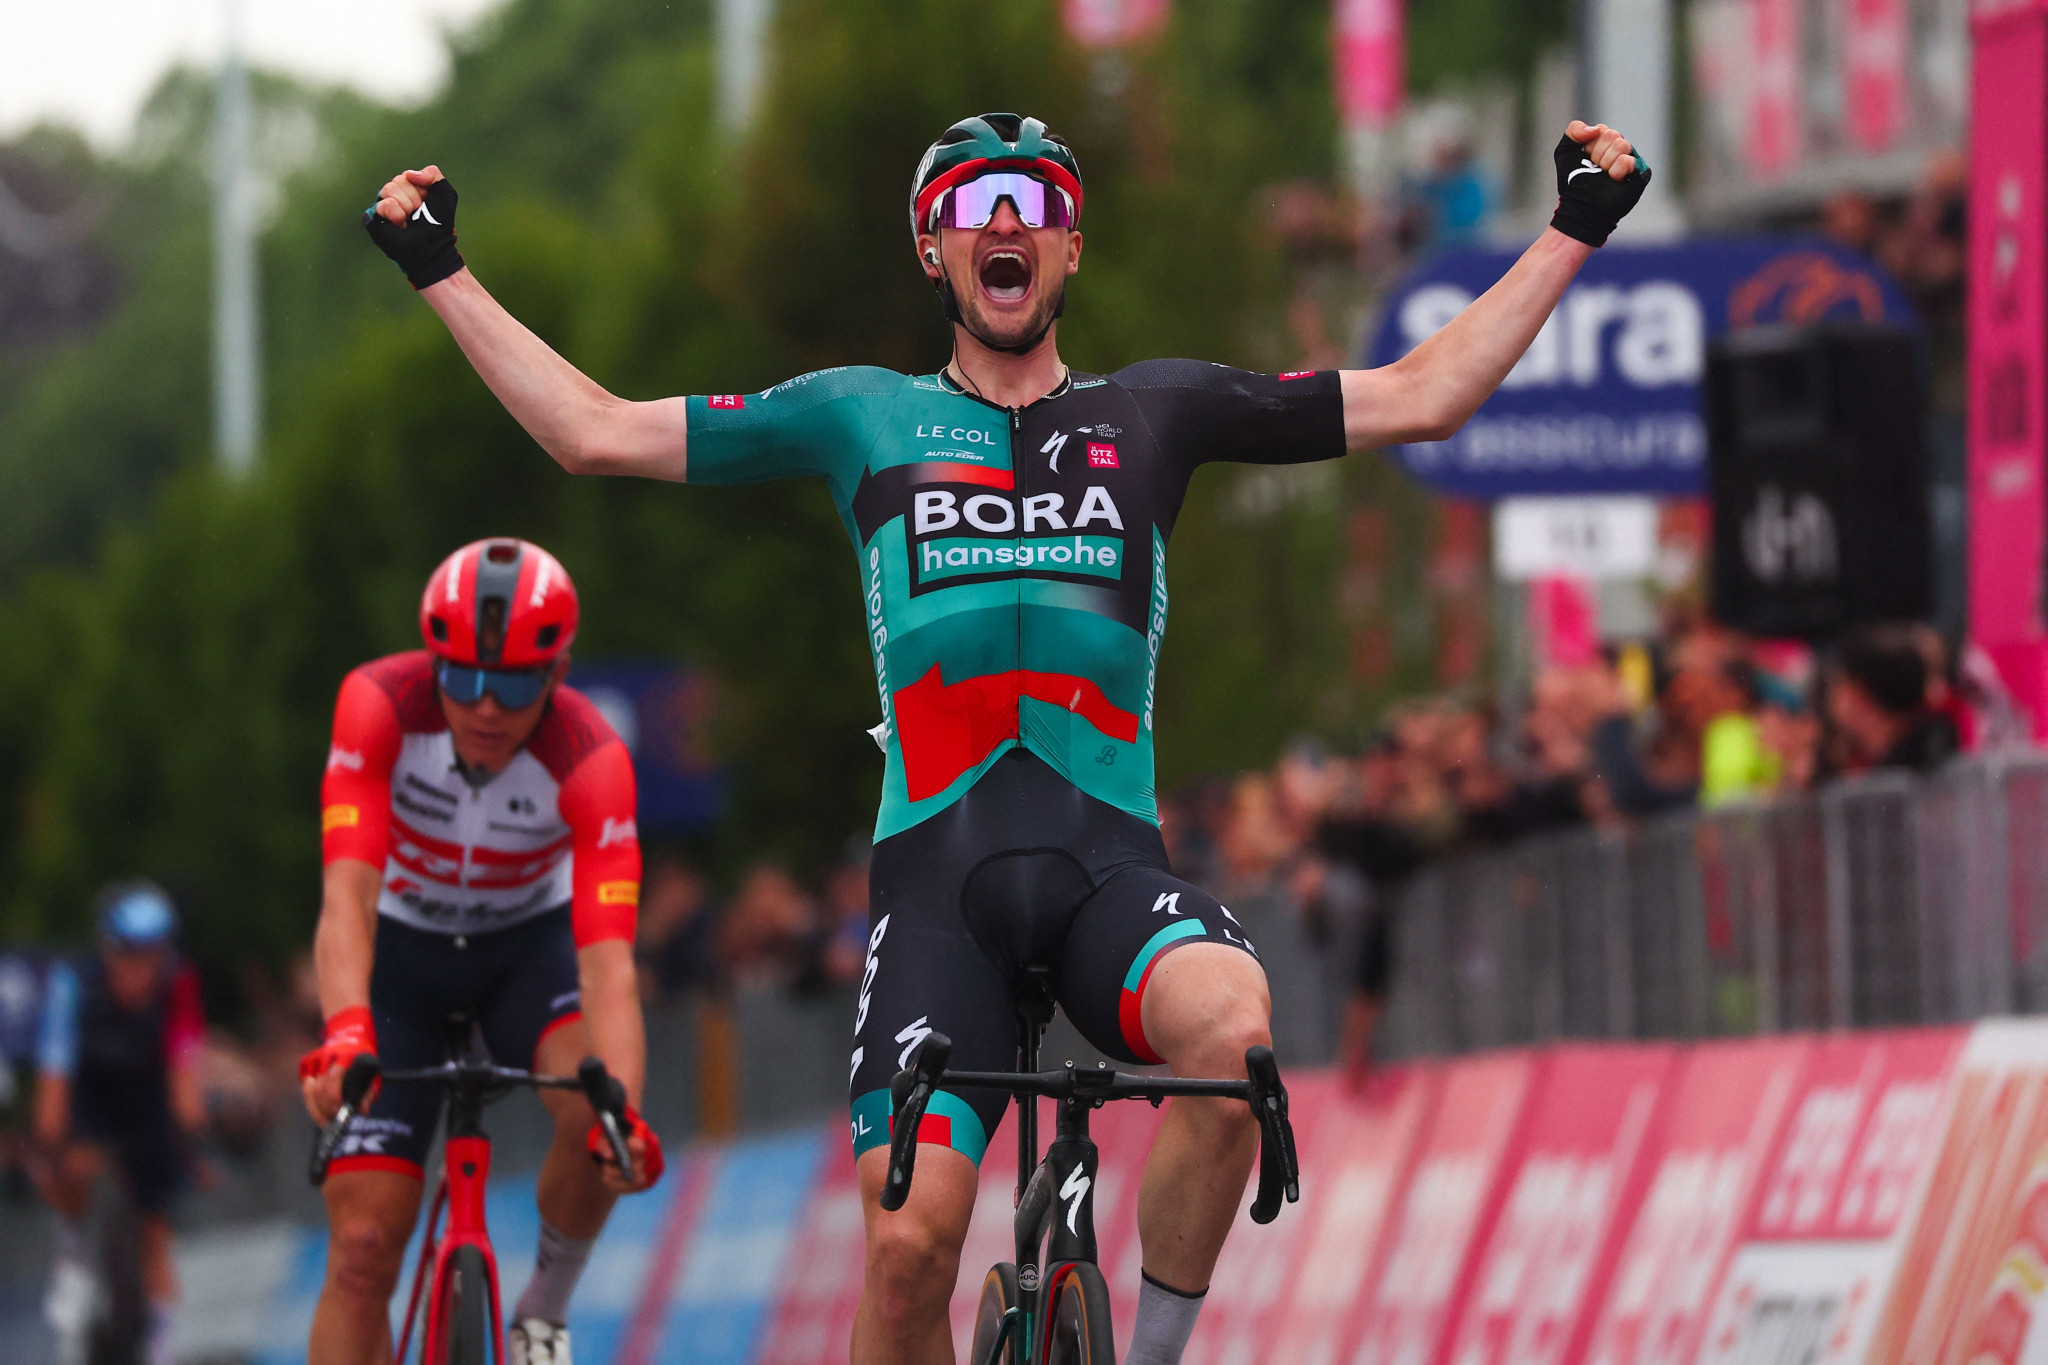 Denz earns first Grand Tour stage win before key mountain stage on Giro d'Italia